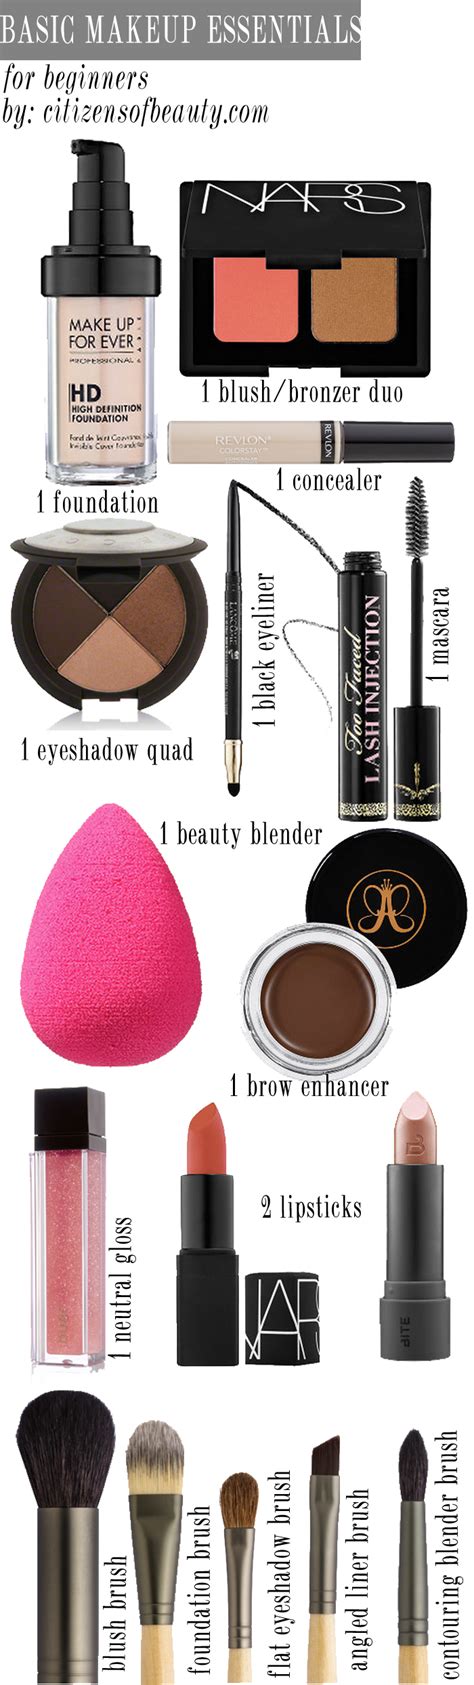 8 Basic Makeup Kit Ideas For Beginners Citizens Of Beauty